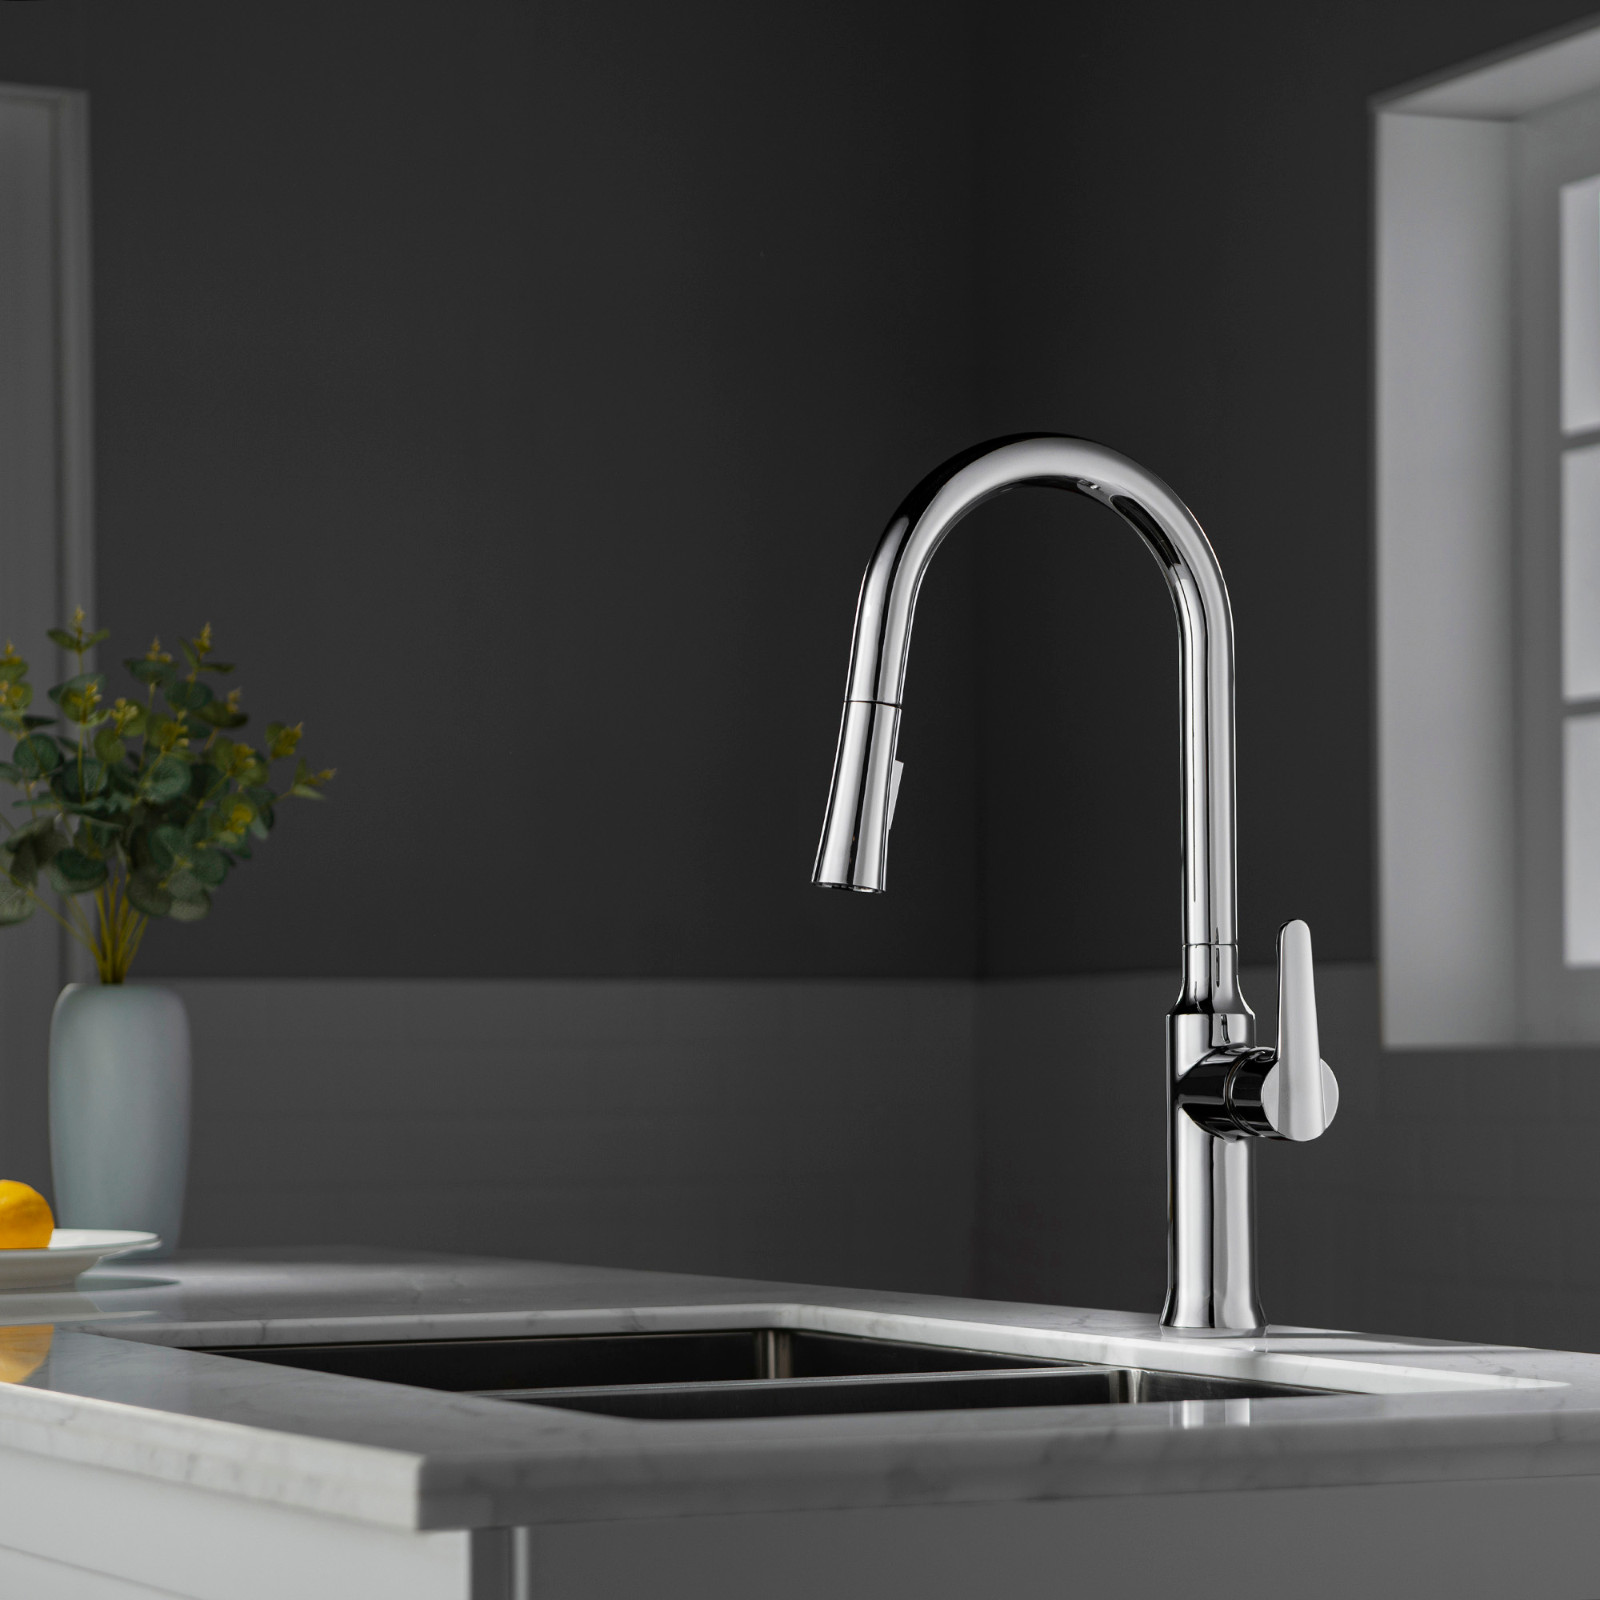  WOODBRIDGE WK030102CH Stainless Steel Single Handle Pre-Rinse Kitchen Faucet with Pull Down Sprayer, Chrome Finish_9433